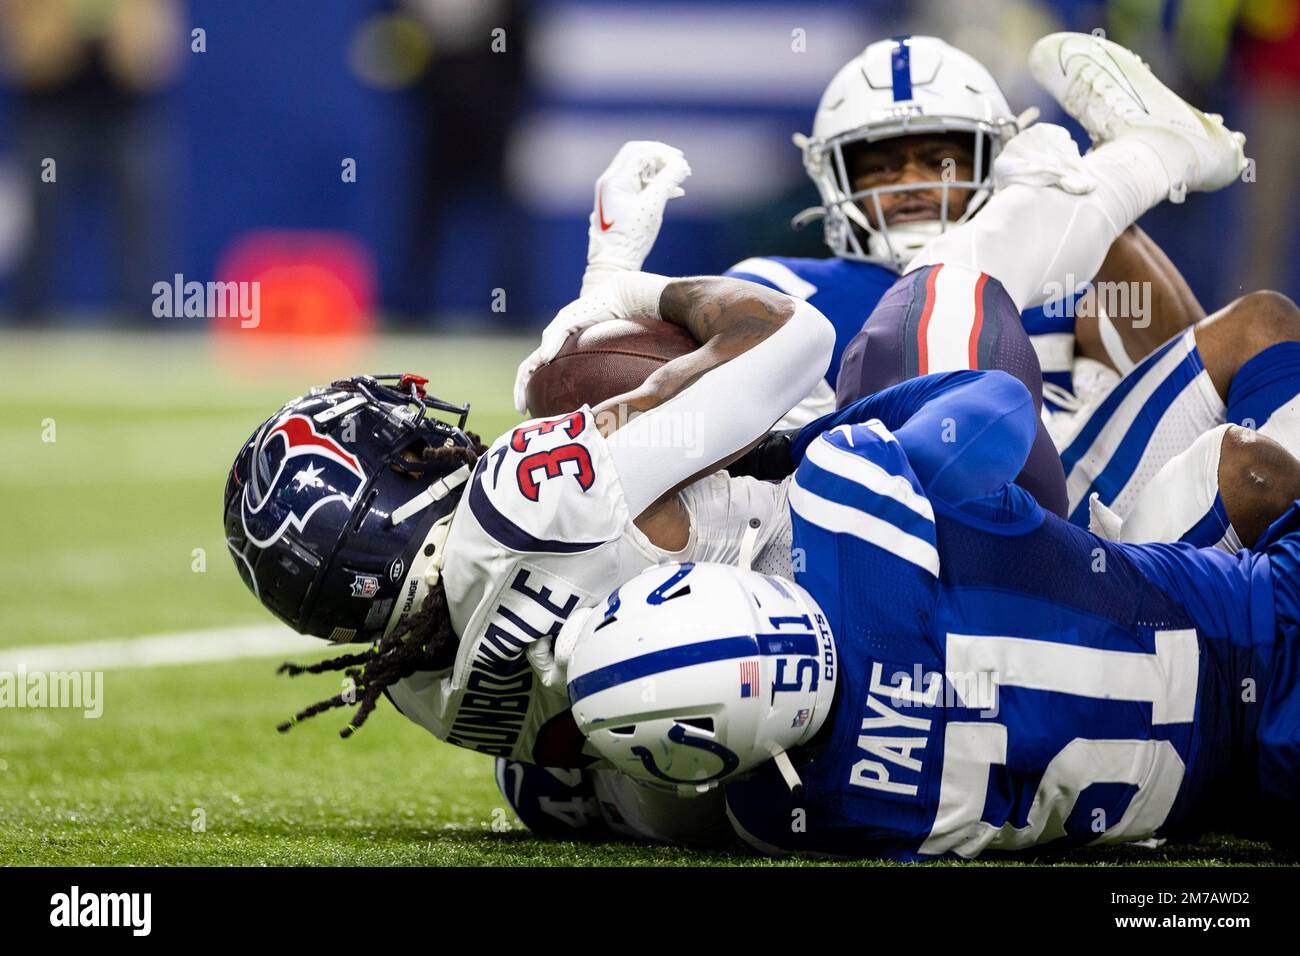 January 08, 2023: Indianapolis Colts defensive lineman Kwity Paye (51)  makes the tackle on Houston Texans running back Dare Ogunbowale (33) during  NFL game in Indianapolis, Indiana. John Mersits/CSM/Sipa USA.(Credit Image:  ©